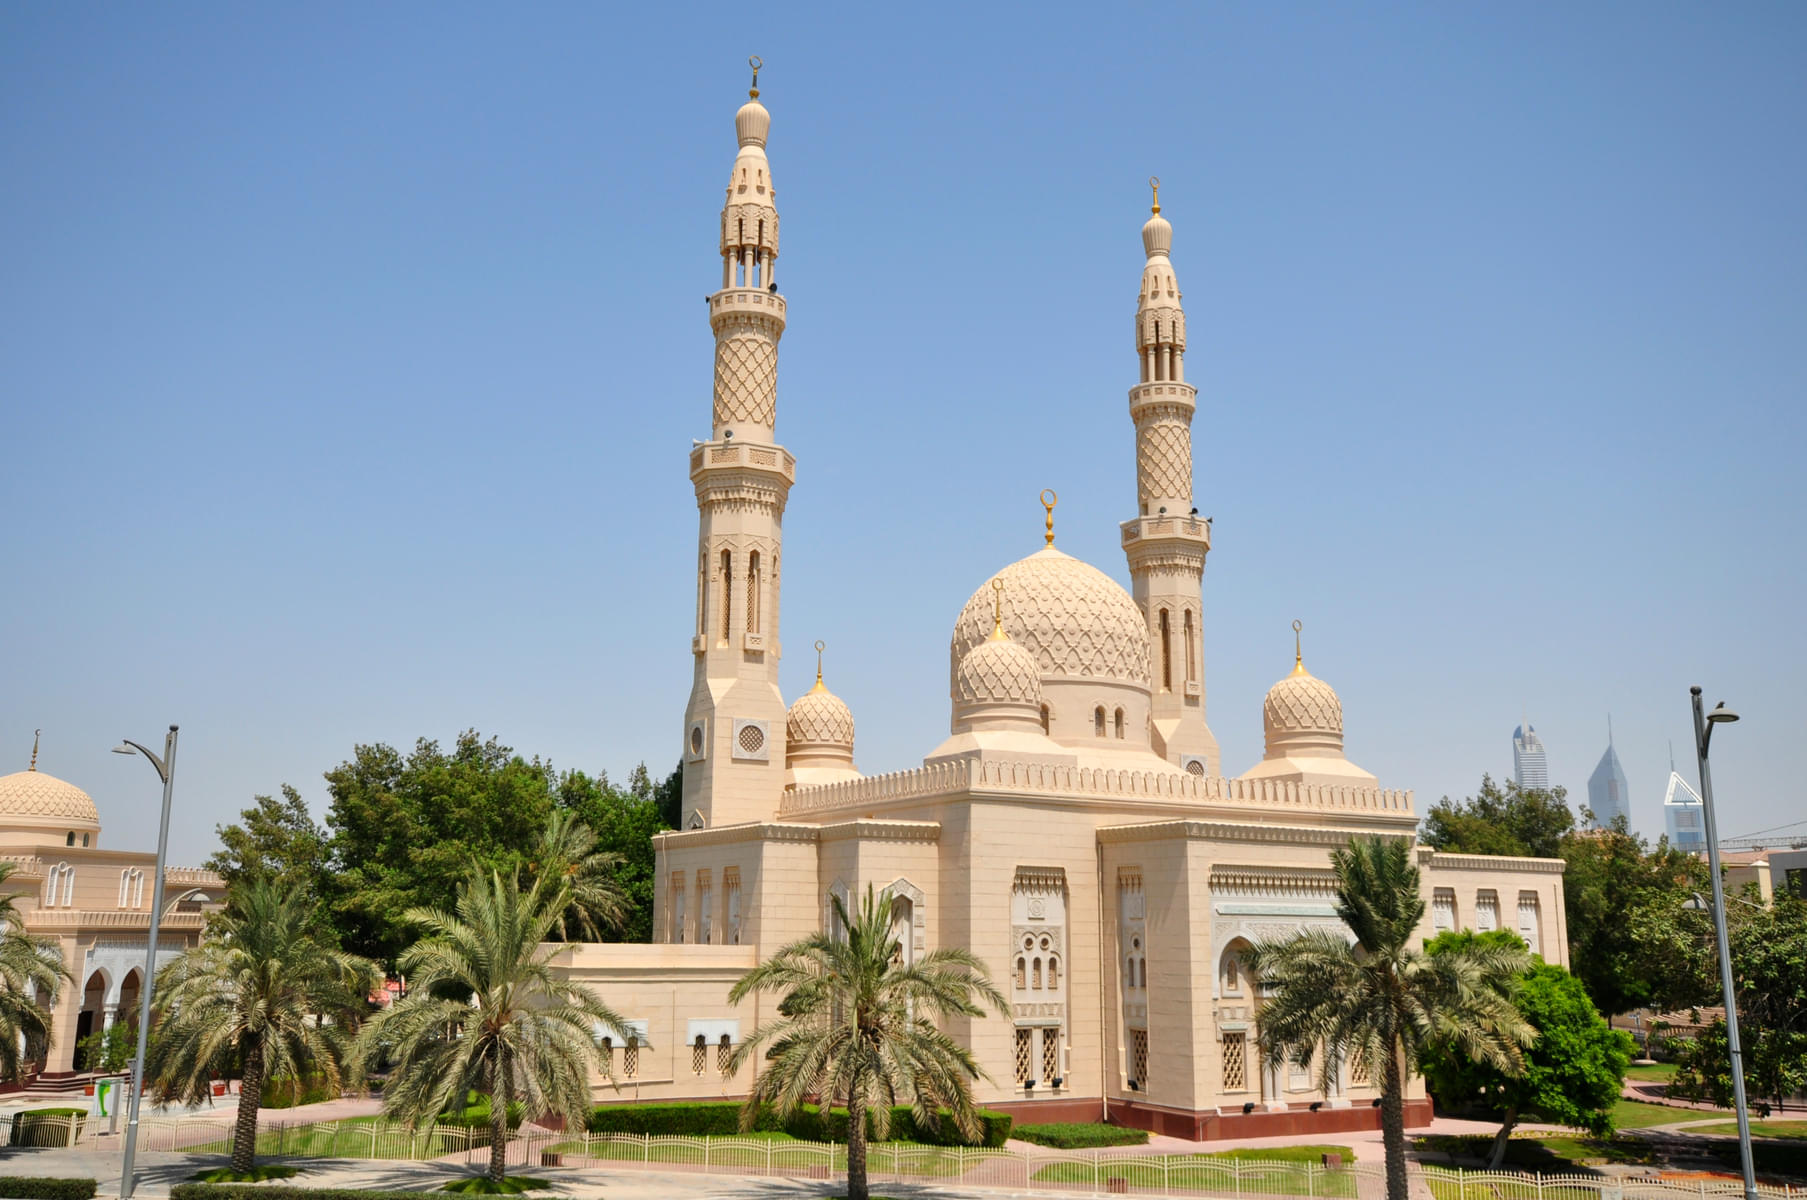 You can see the beautiful Jumeirah Mosque while on Dubai City Tour